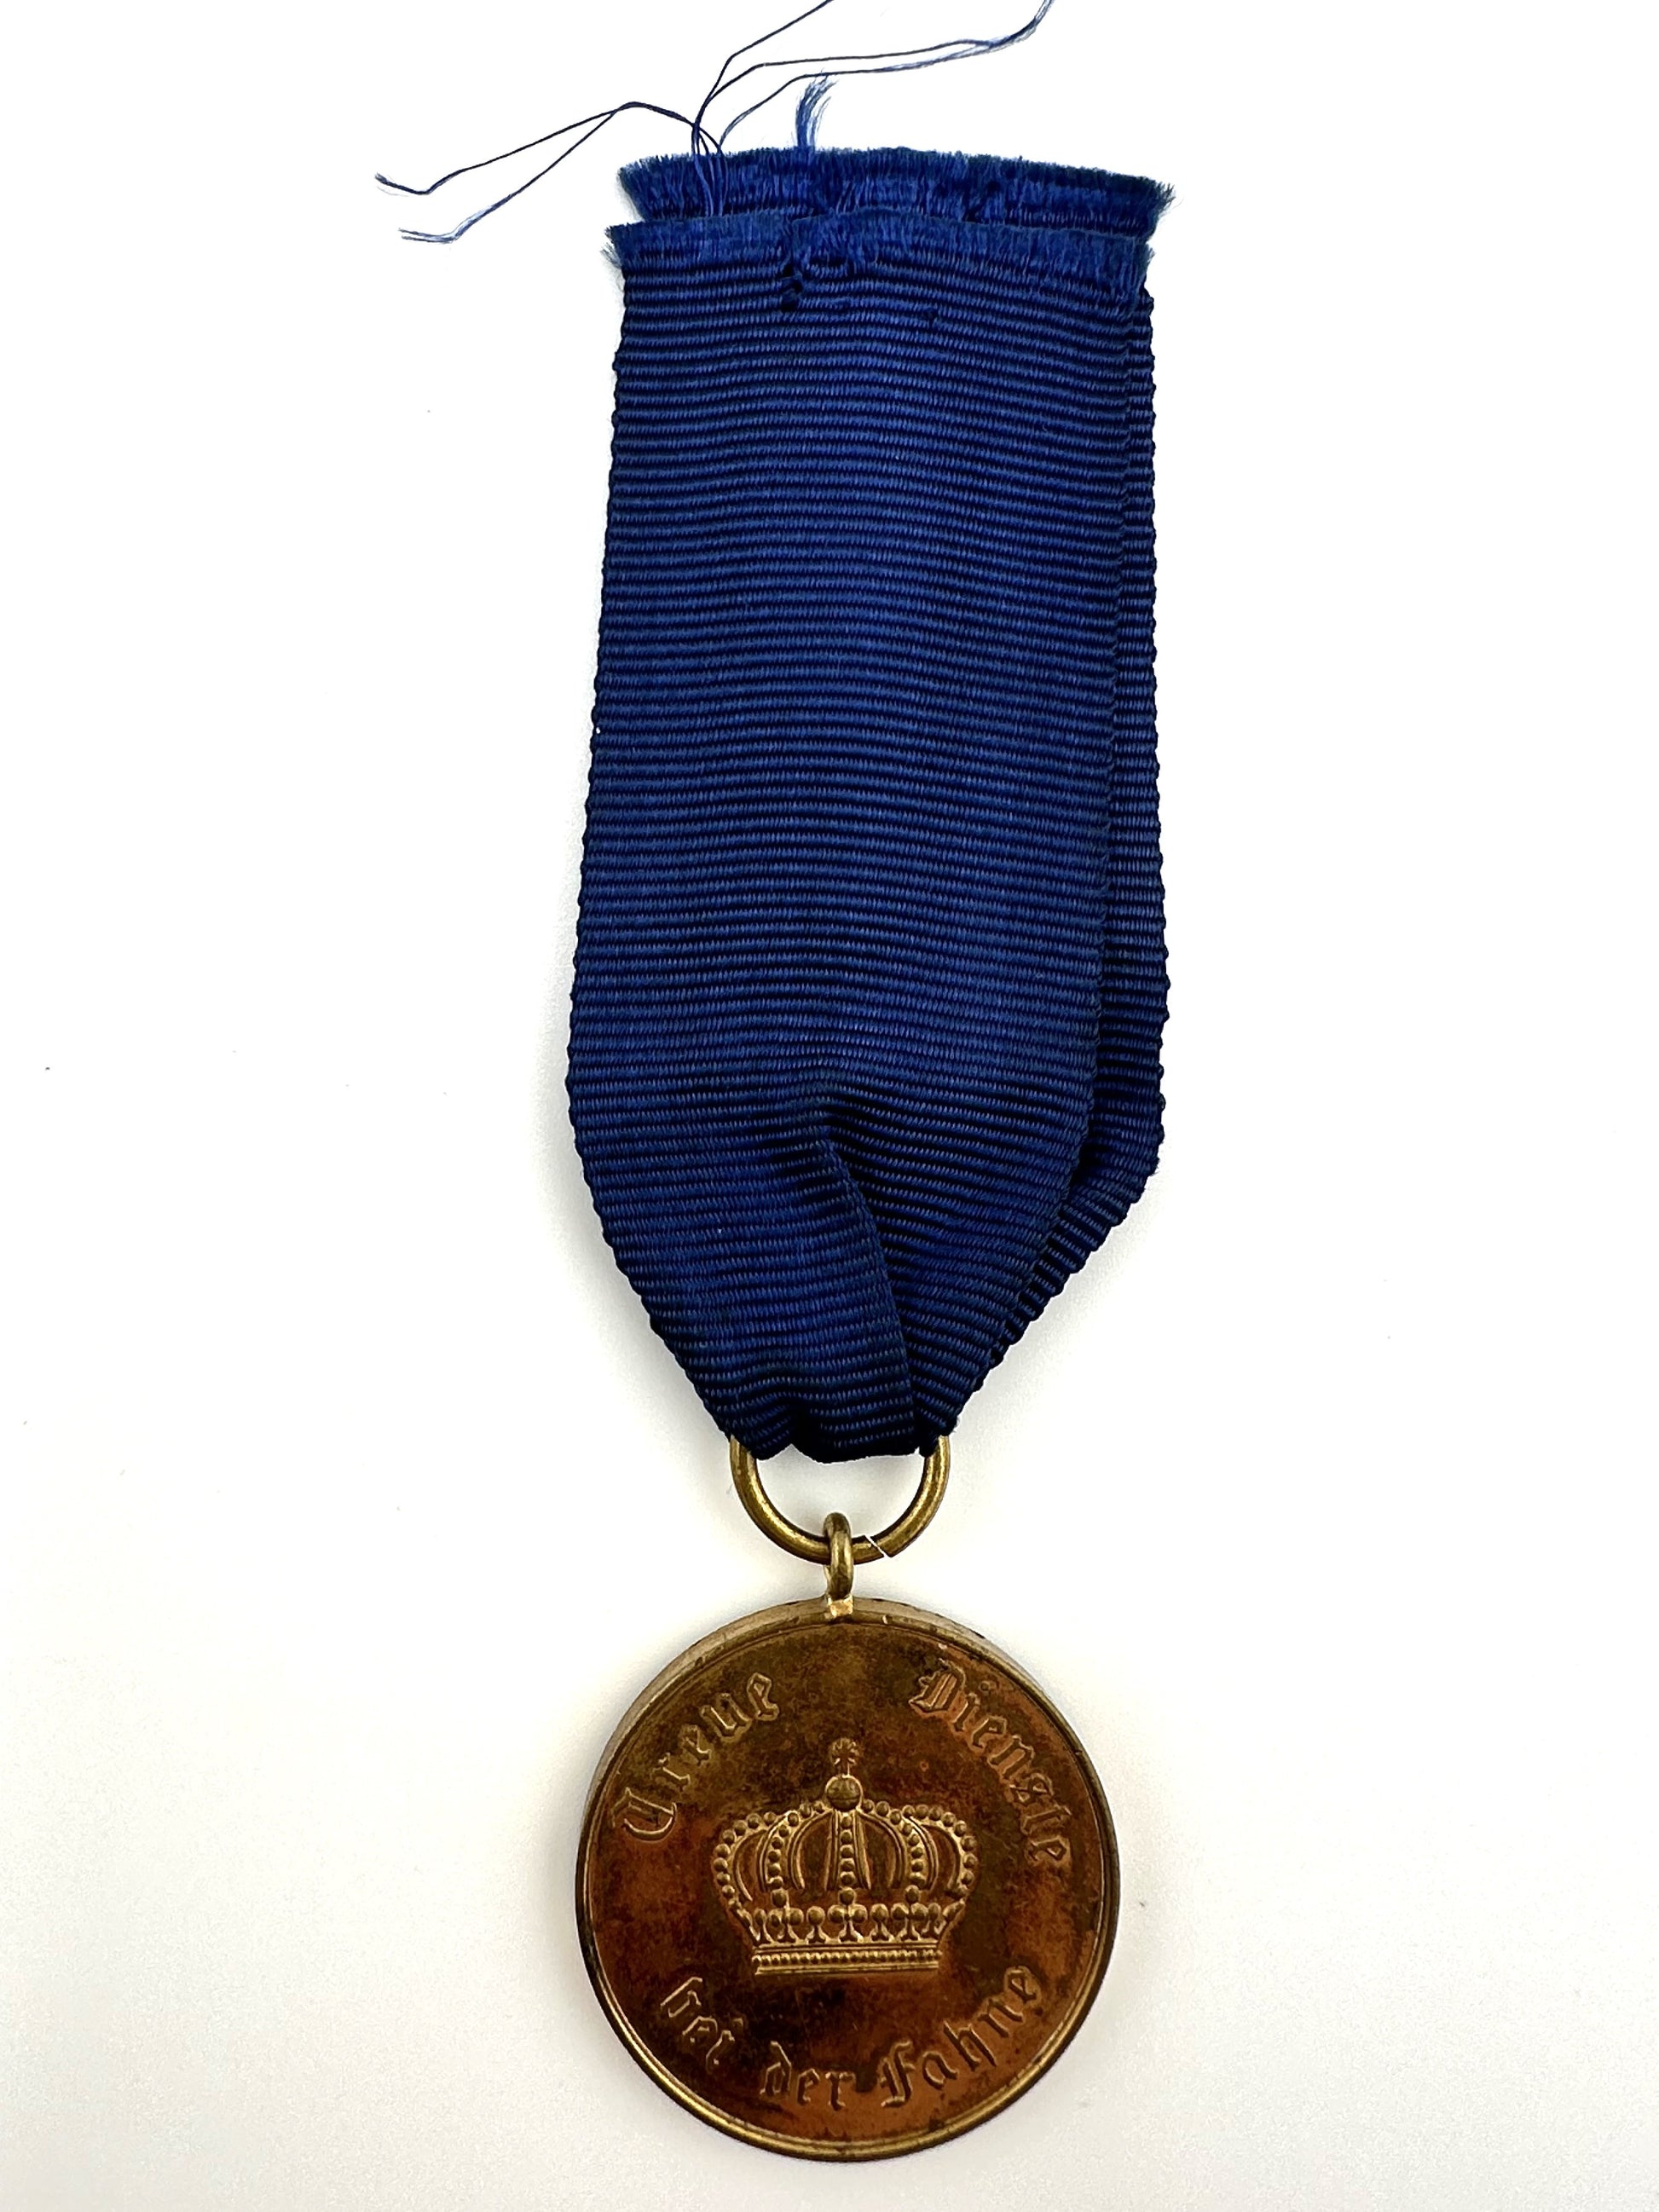 Prussia Long Service Medal for 12 years service - Derrittmeister Militaria Group